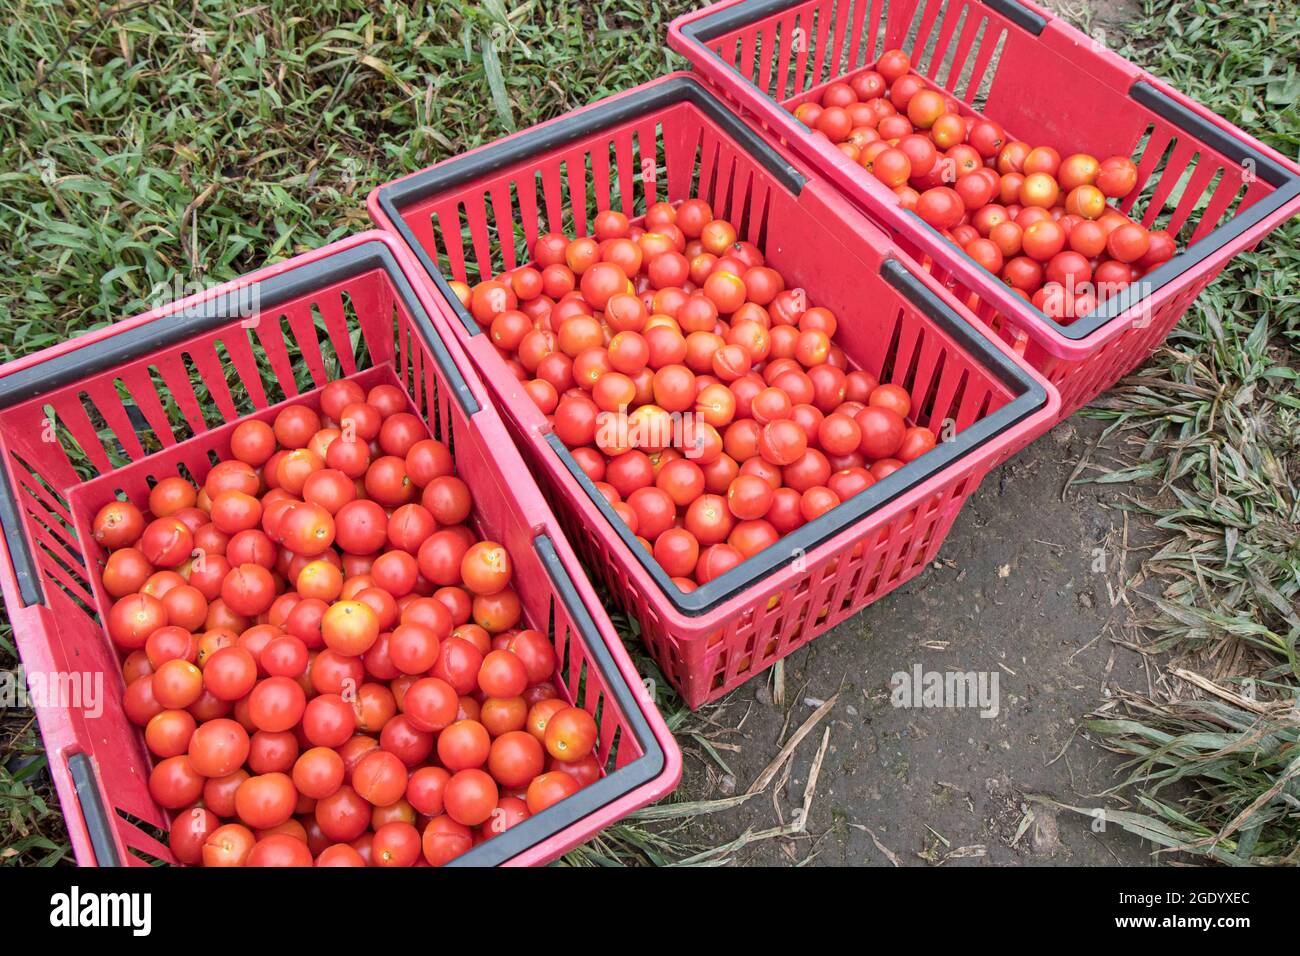 Tomatoes that were just picked at a Massachusetts farm Stock Photo